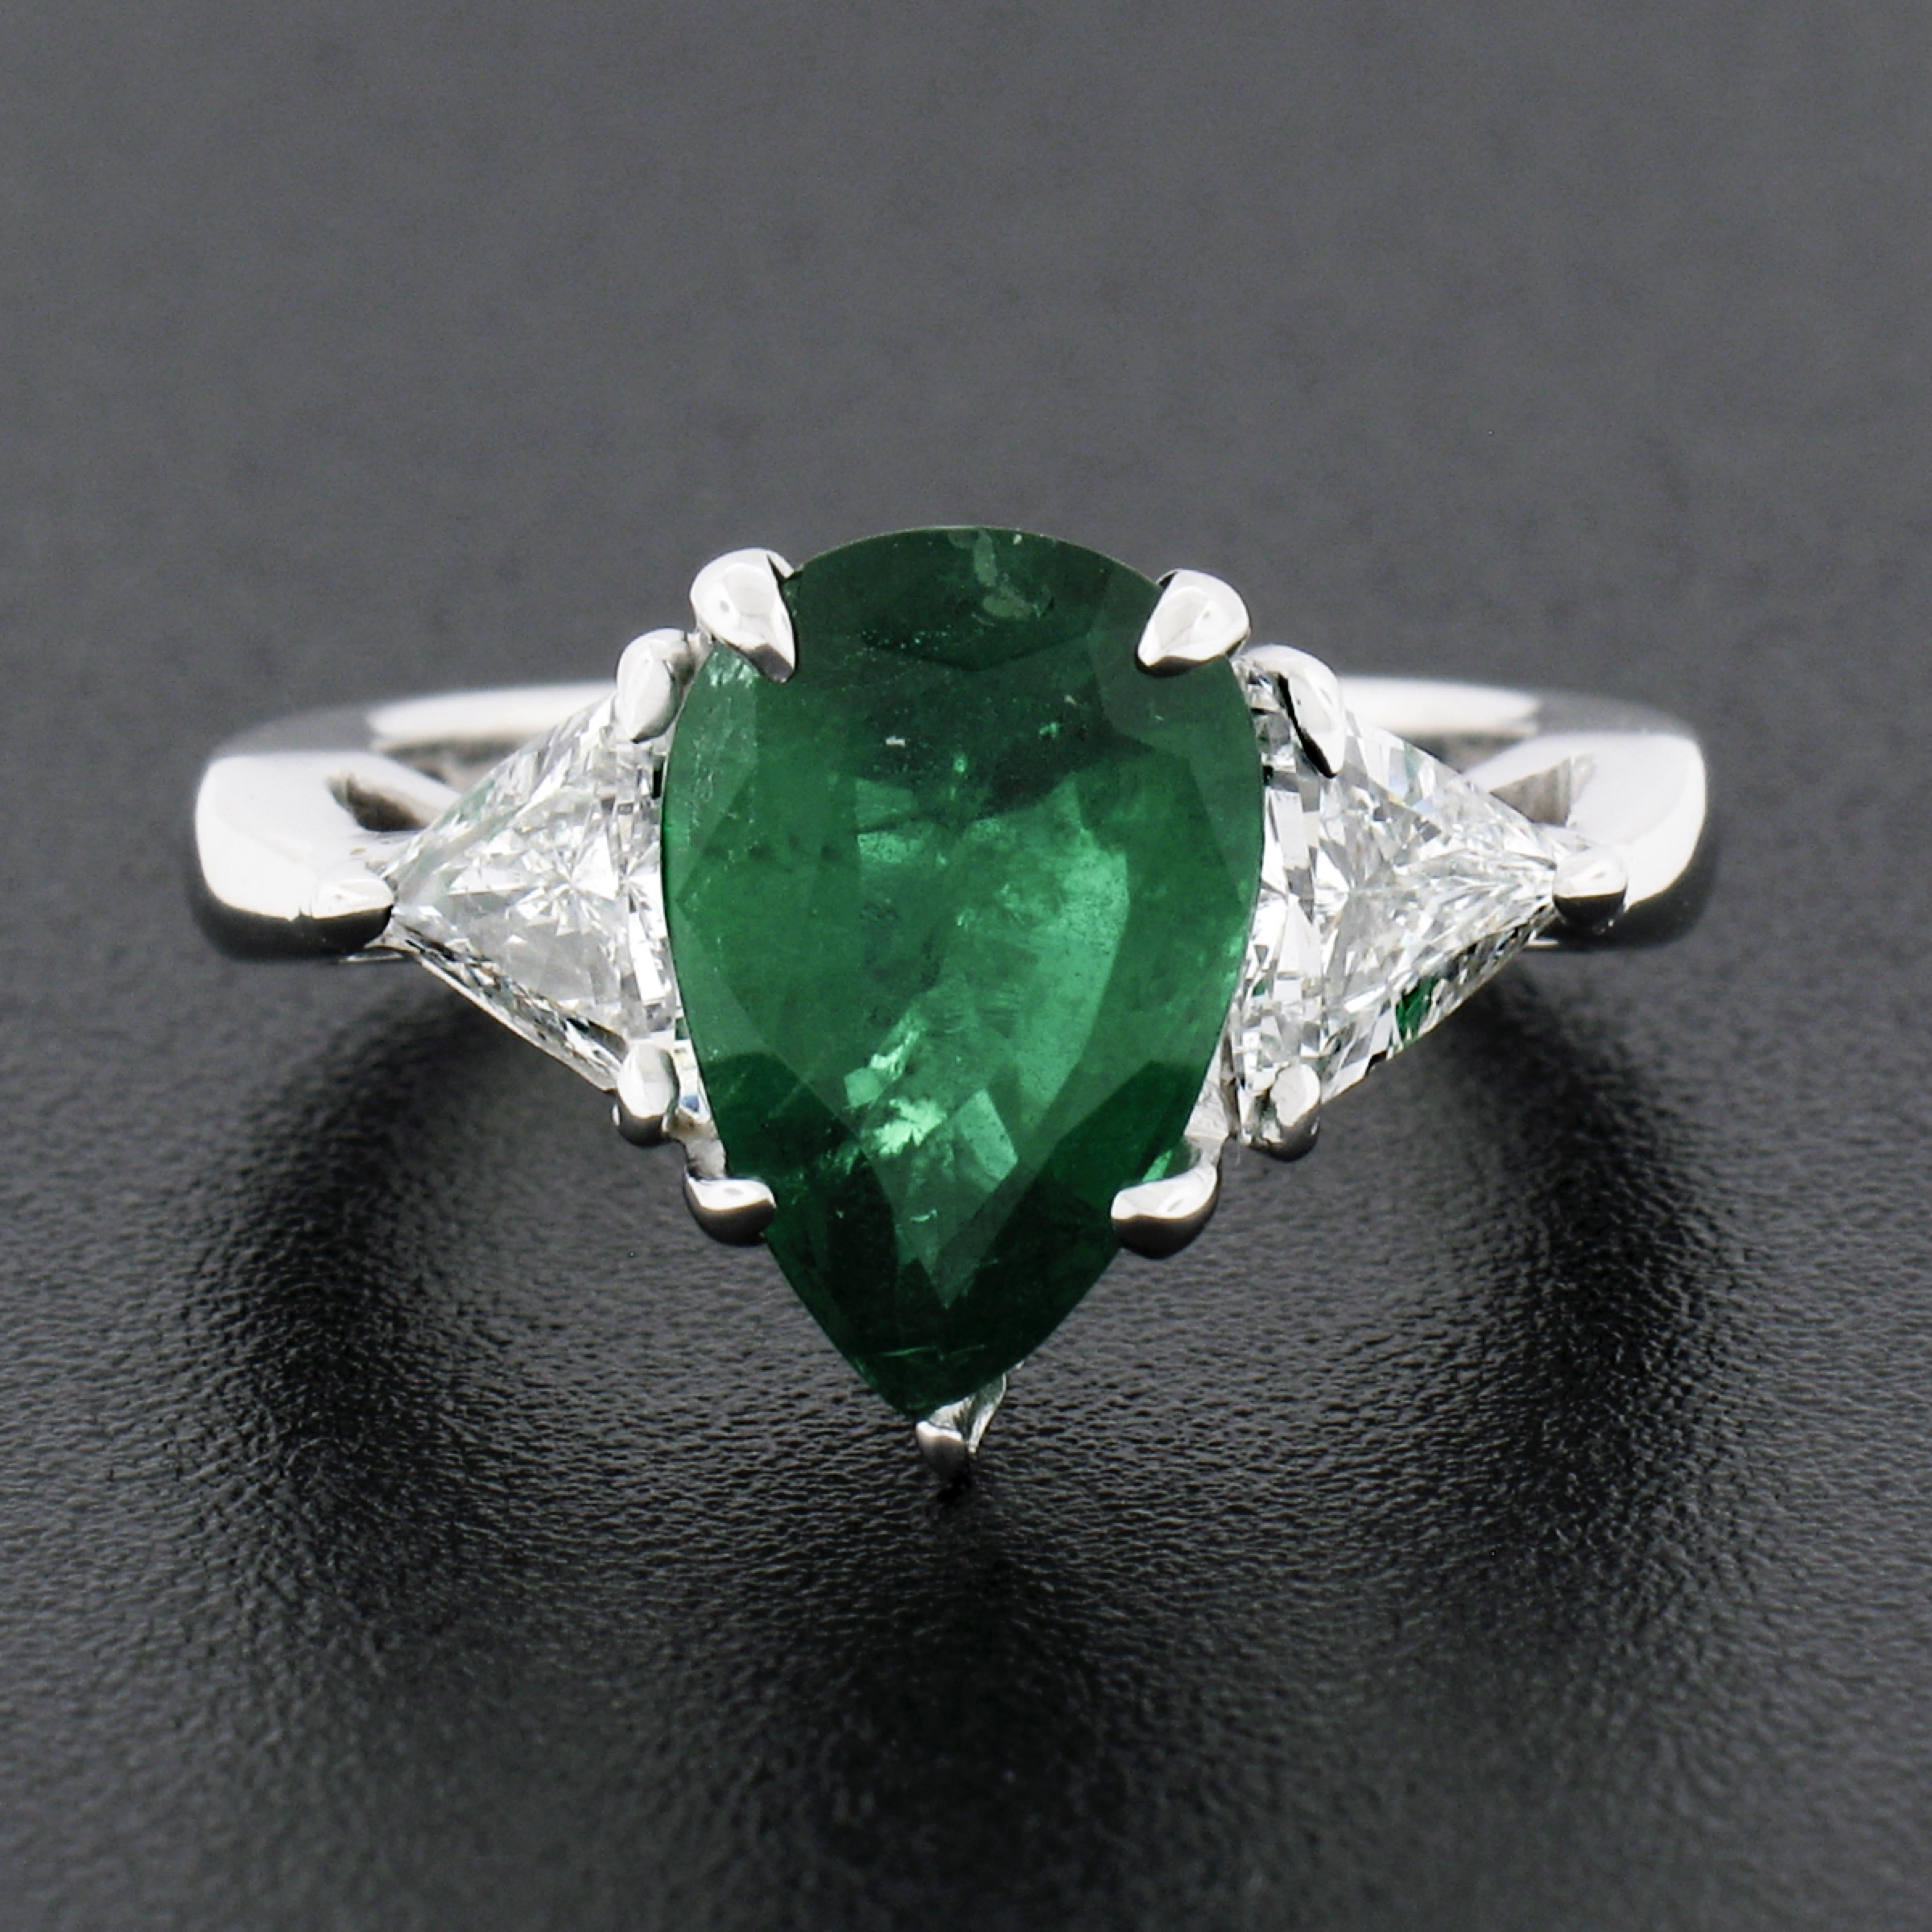 Here we have a magnificent vintage emerald and diamond three-stone ring that is crafted in solid platinum. The ring features a gorgeous, GIA certified, natural emerald stone that displays a very rare and truly incredible vivid green color with